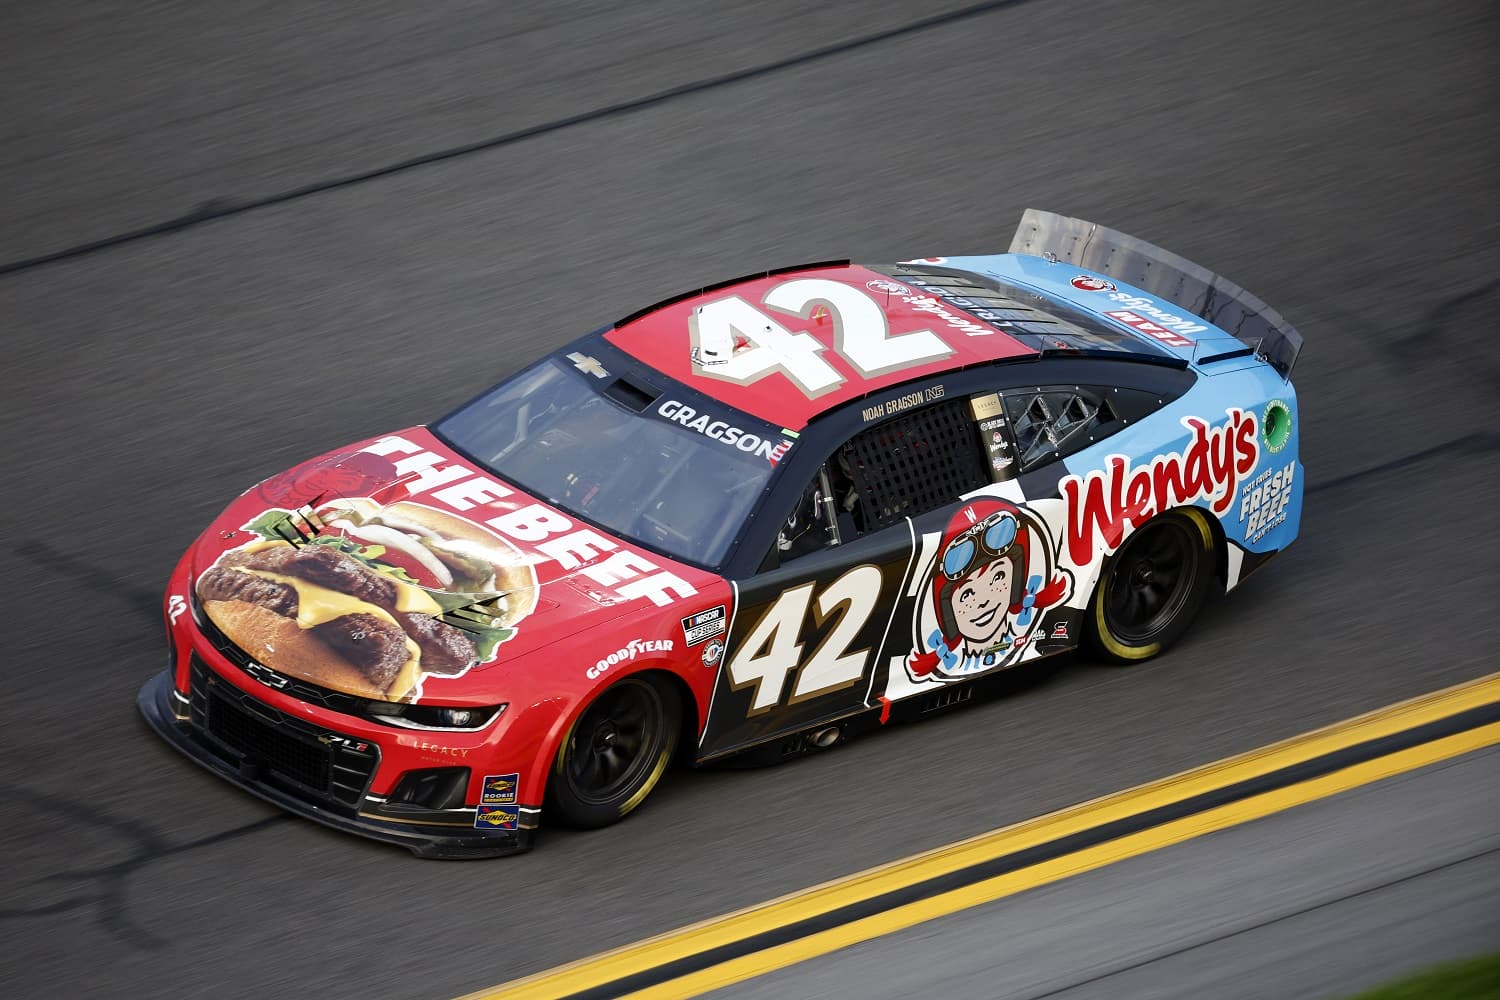 The Beef Between the Bubba Wallace and Noah Gragson Teams Is a Fresh Daytona 500 Sideshow